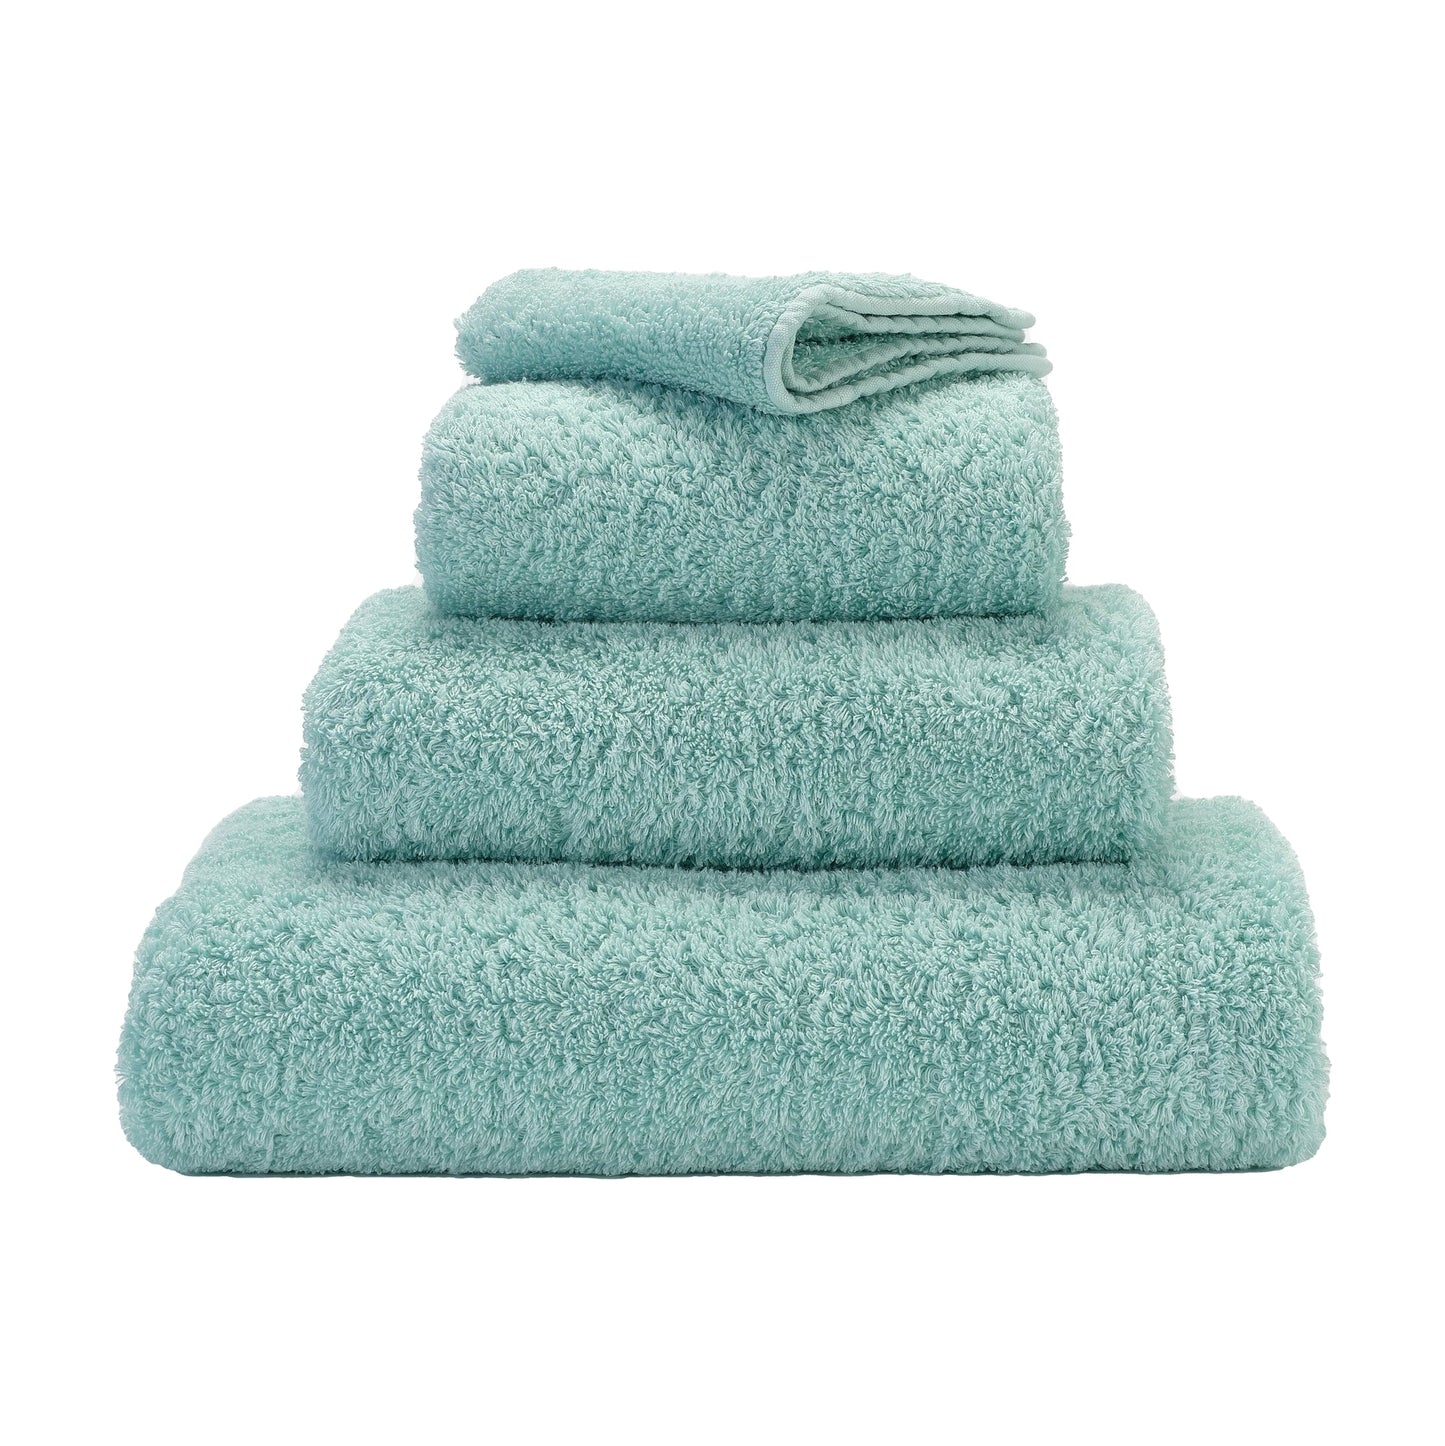 Luxury Light Blue Super Pile Egyptian Cotton Towel by Abyss & Habidecor | 235 Ice - |VESIMI Design| Luxury and Rustic bathrooms online